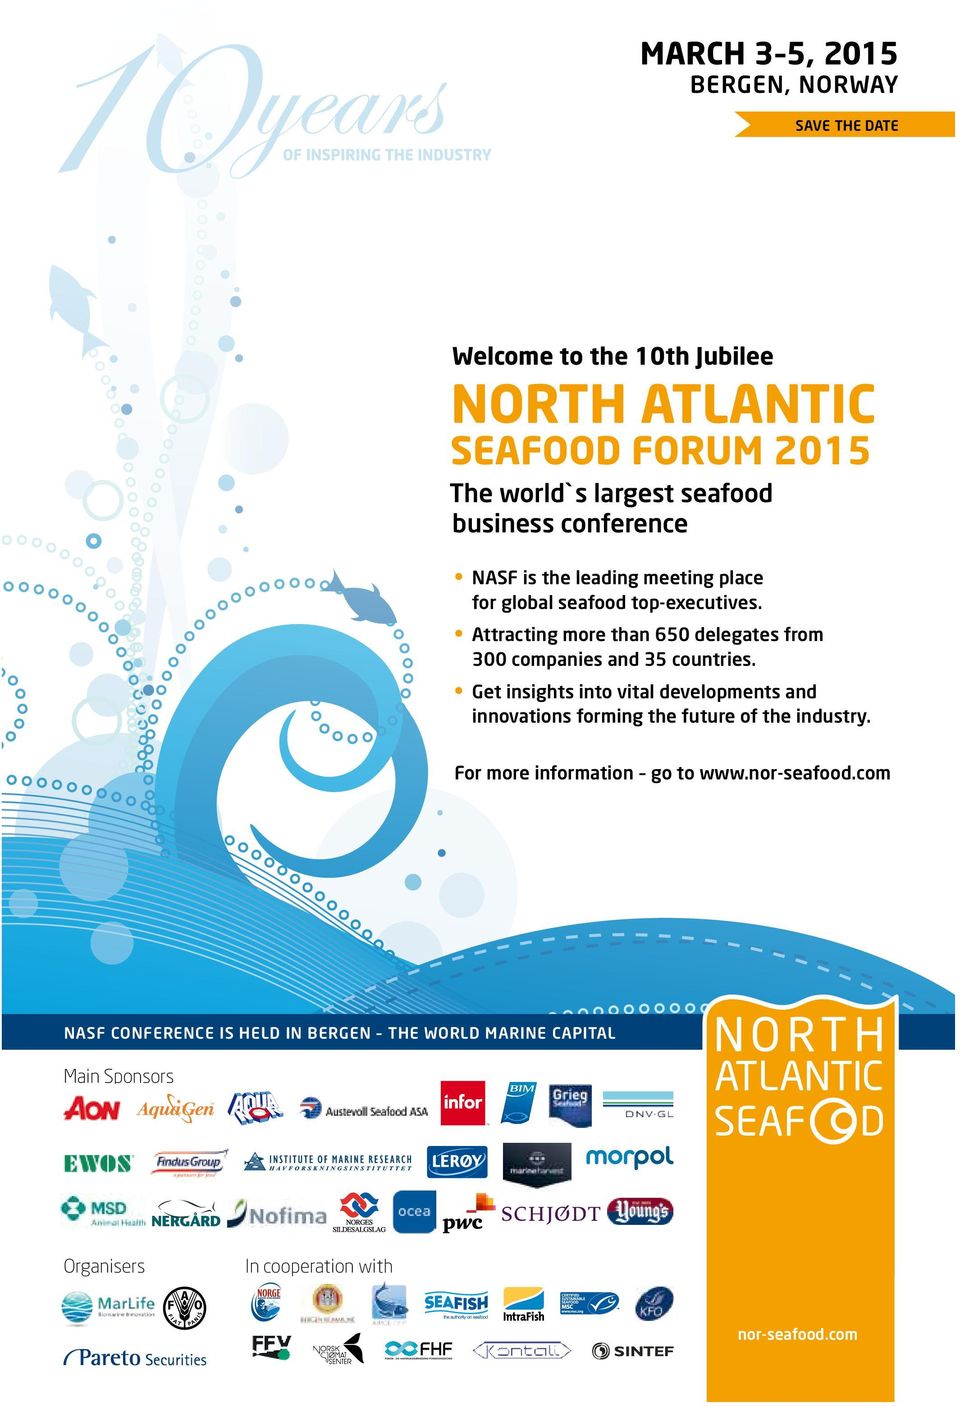 Get insights into vital developments and innovations forming the future of the industry. For more information go to www.nor-seafood.